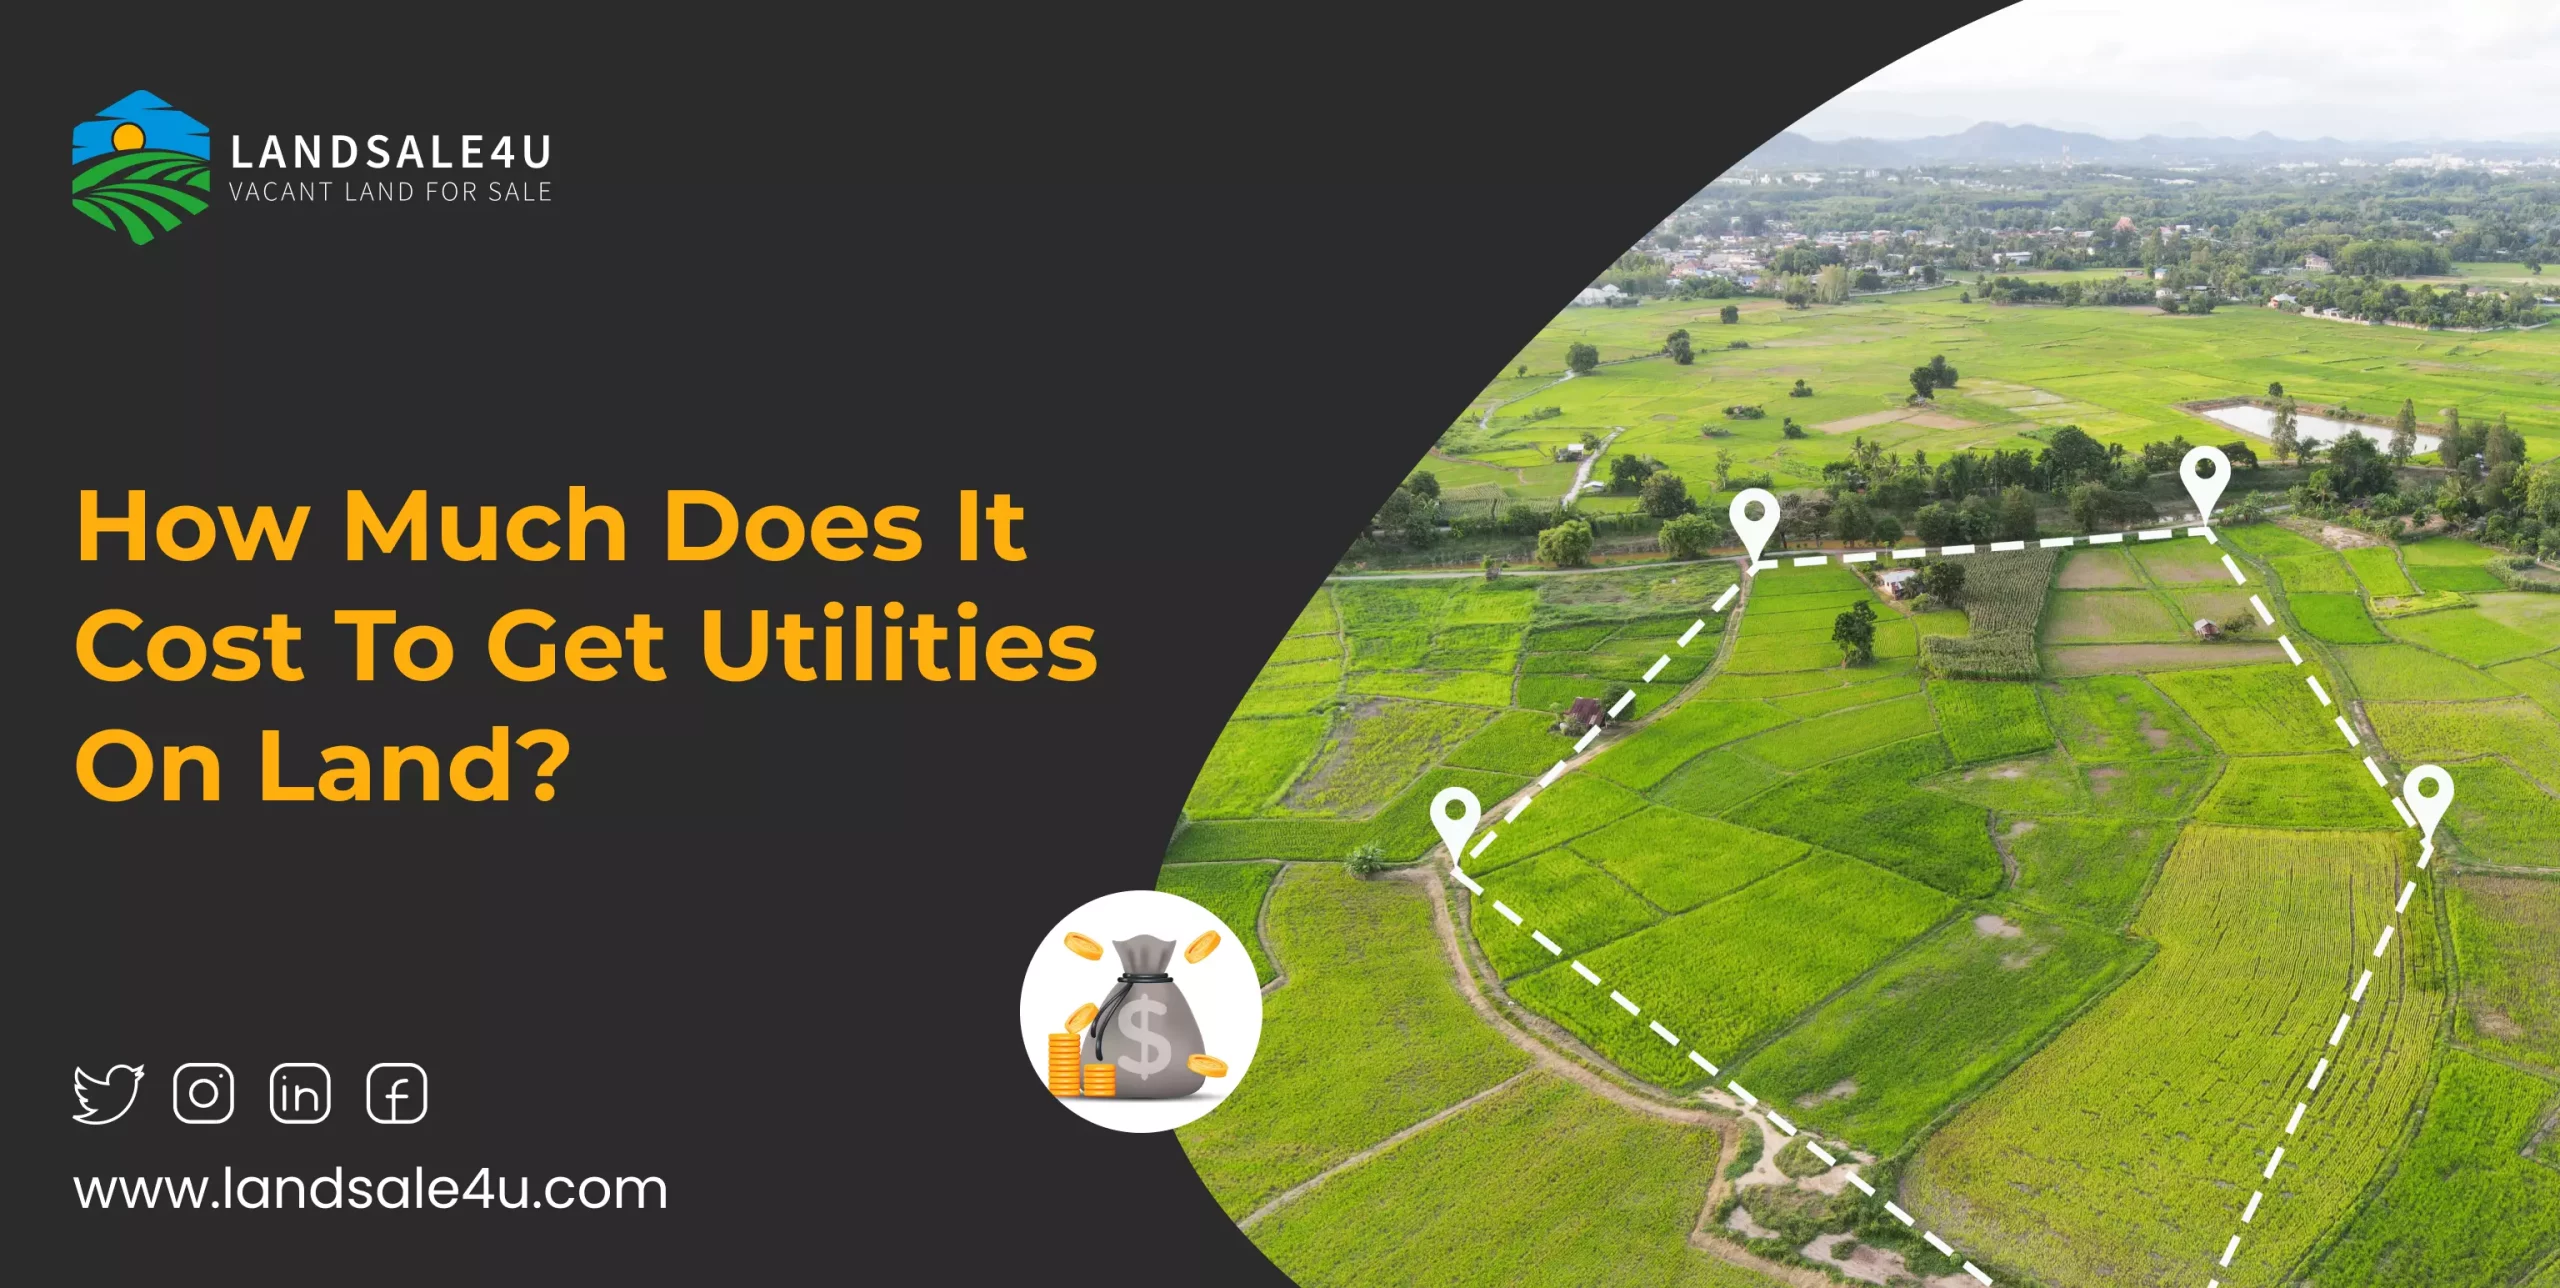 How Much Does It Cost To Get Utilities On Land